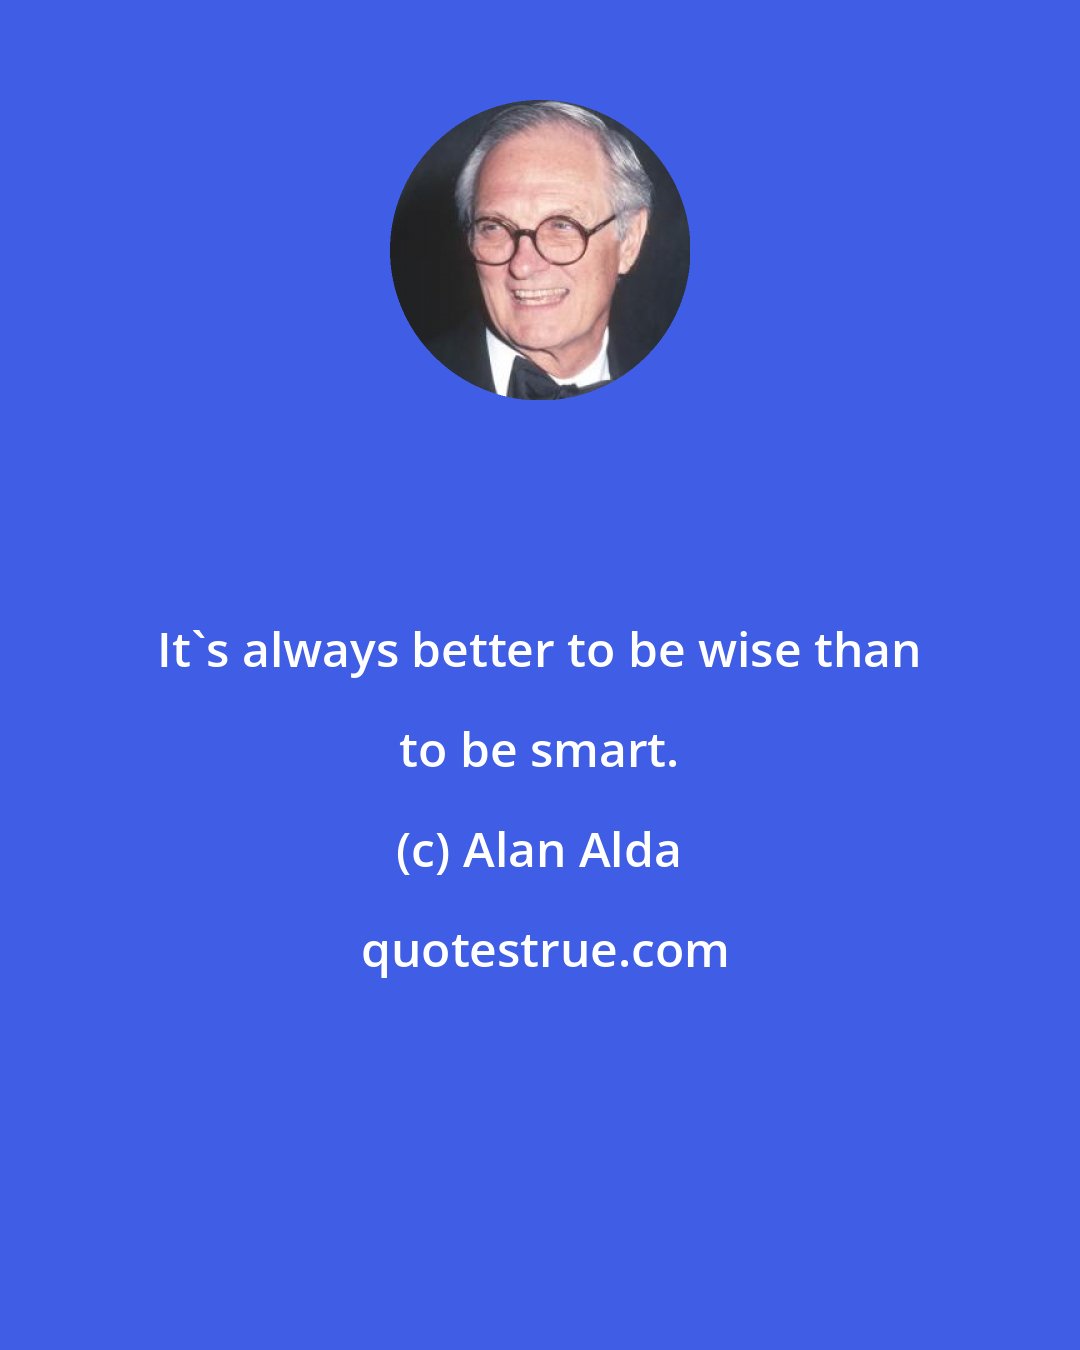 Alan Alda: It's always better to be wise than to be smart.